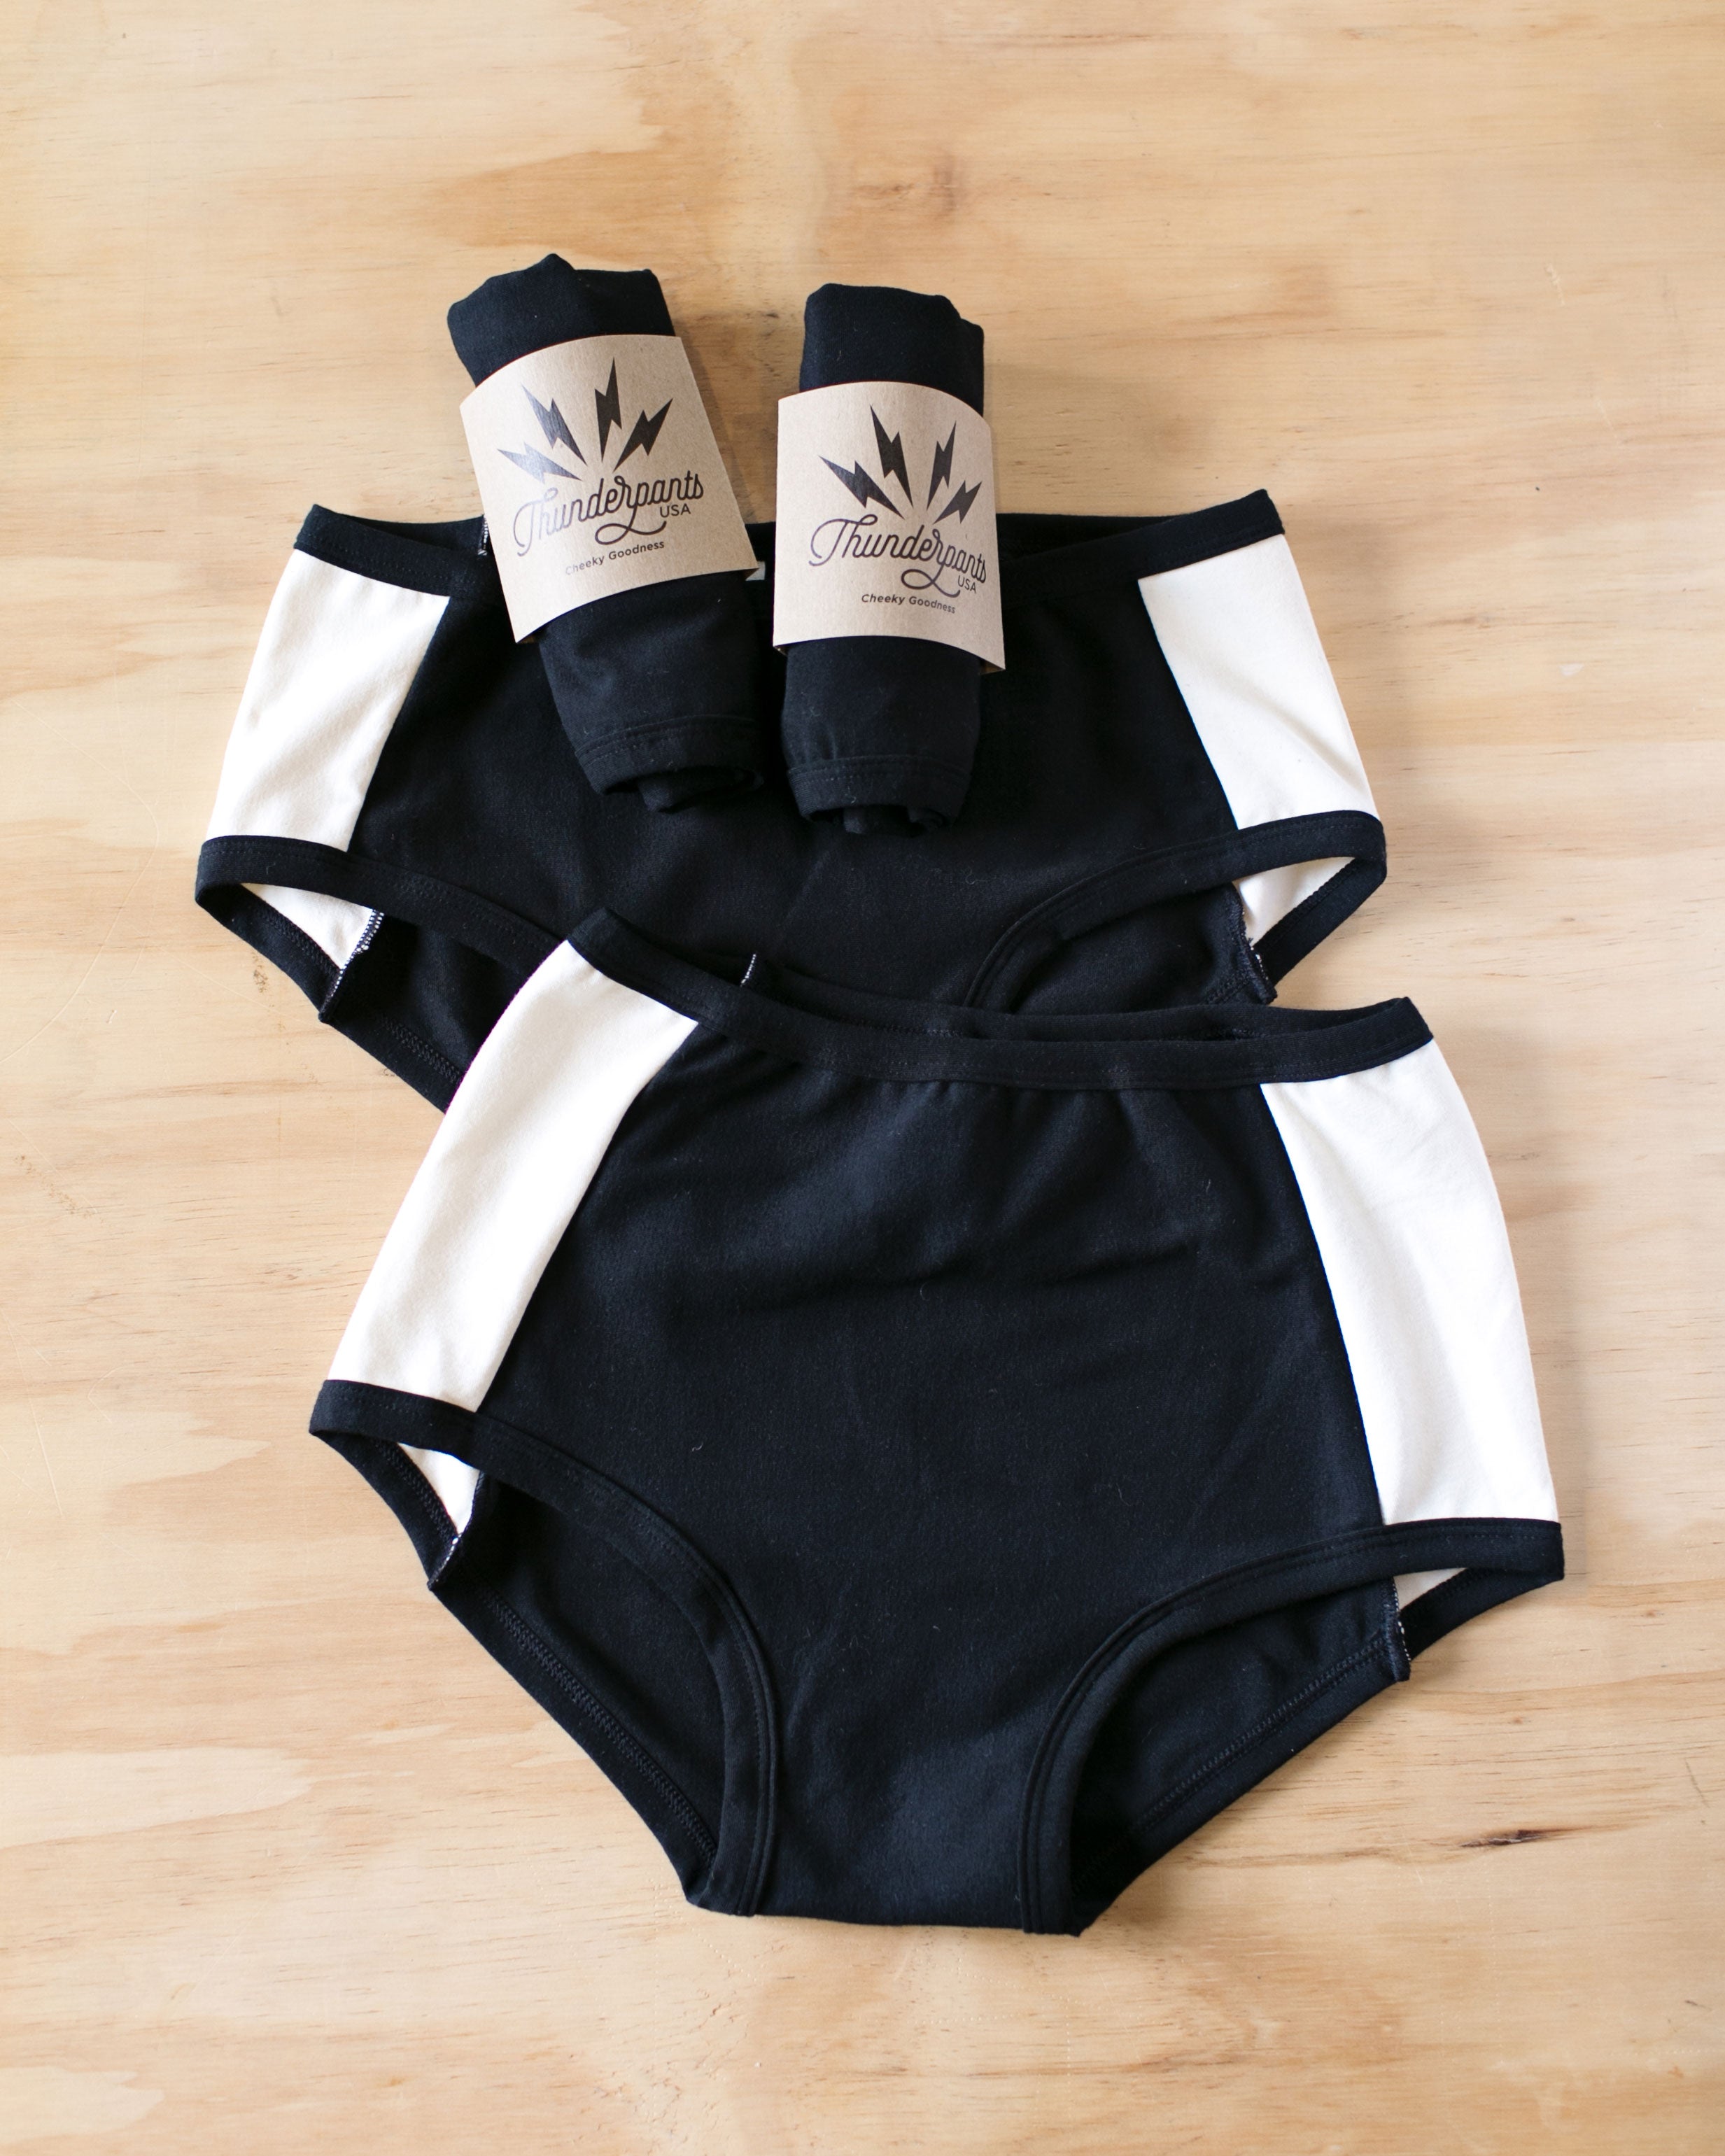 Flat lay on wood of our Cookies and Cream Panel Pants in the Hipster style, Original style, and packaged underwear: black panel in the center and vanilla panels on both sides with black binding.